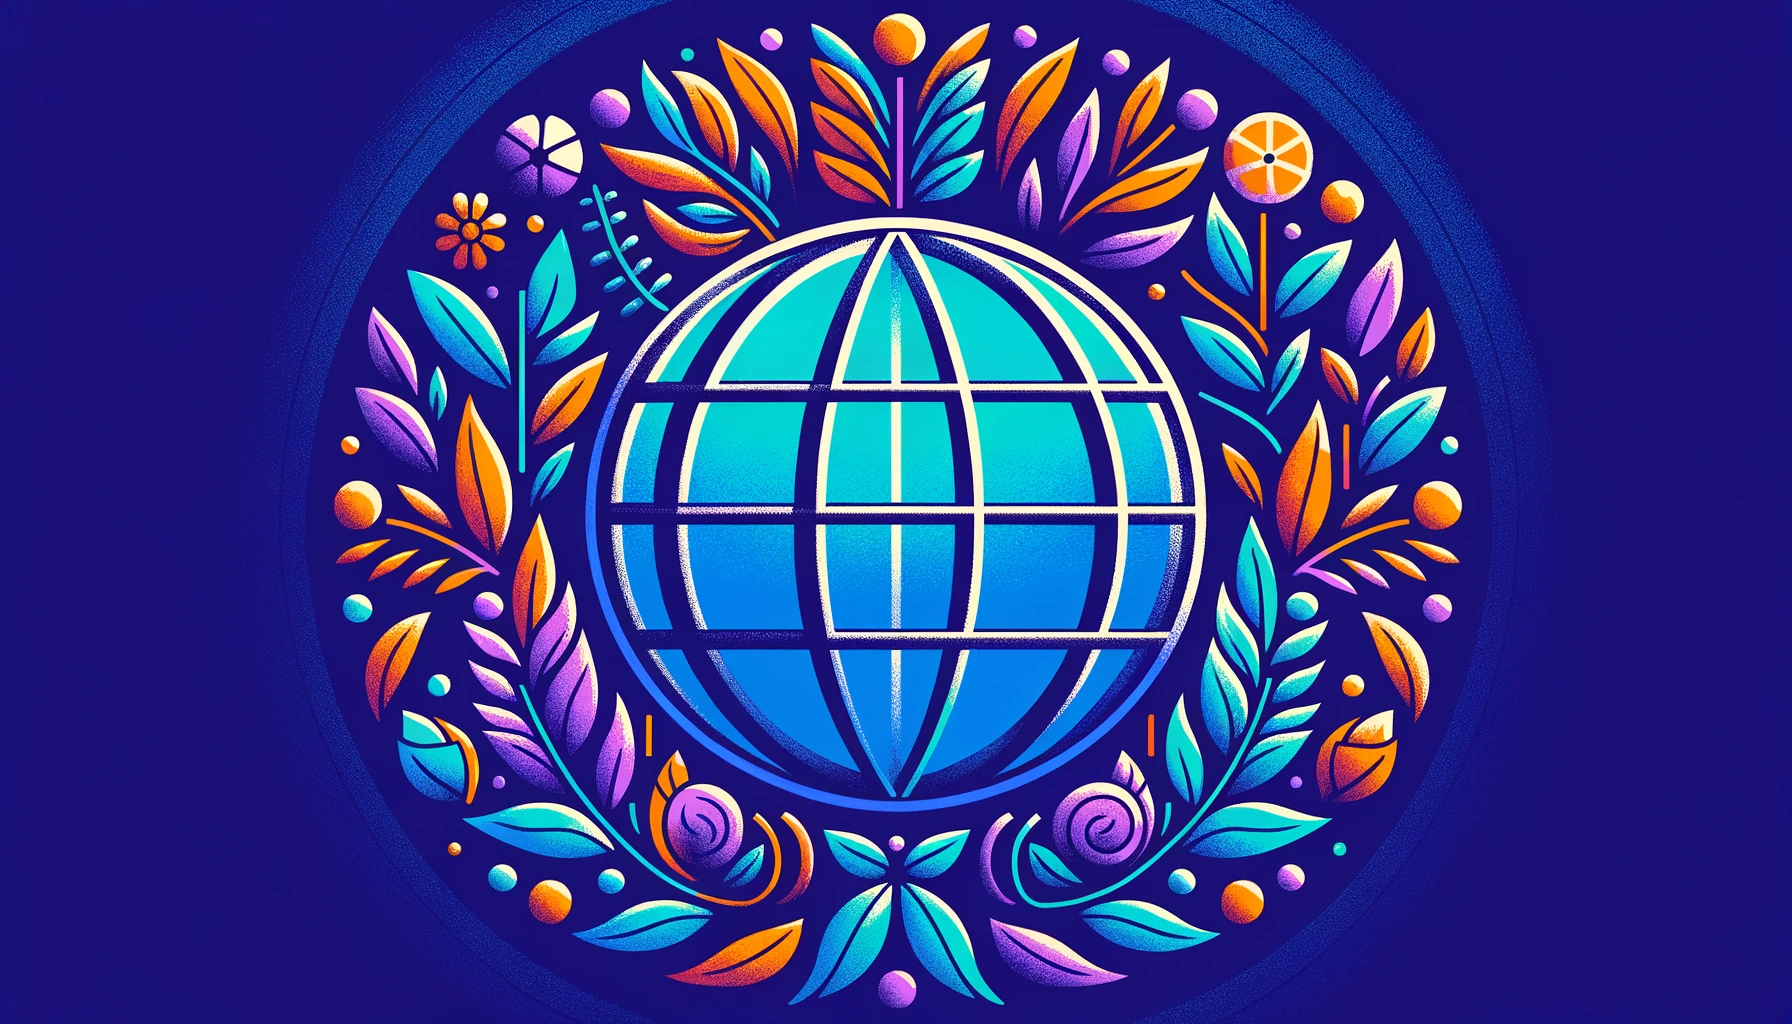 domain cover - globe icon with plants